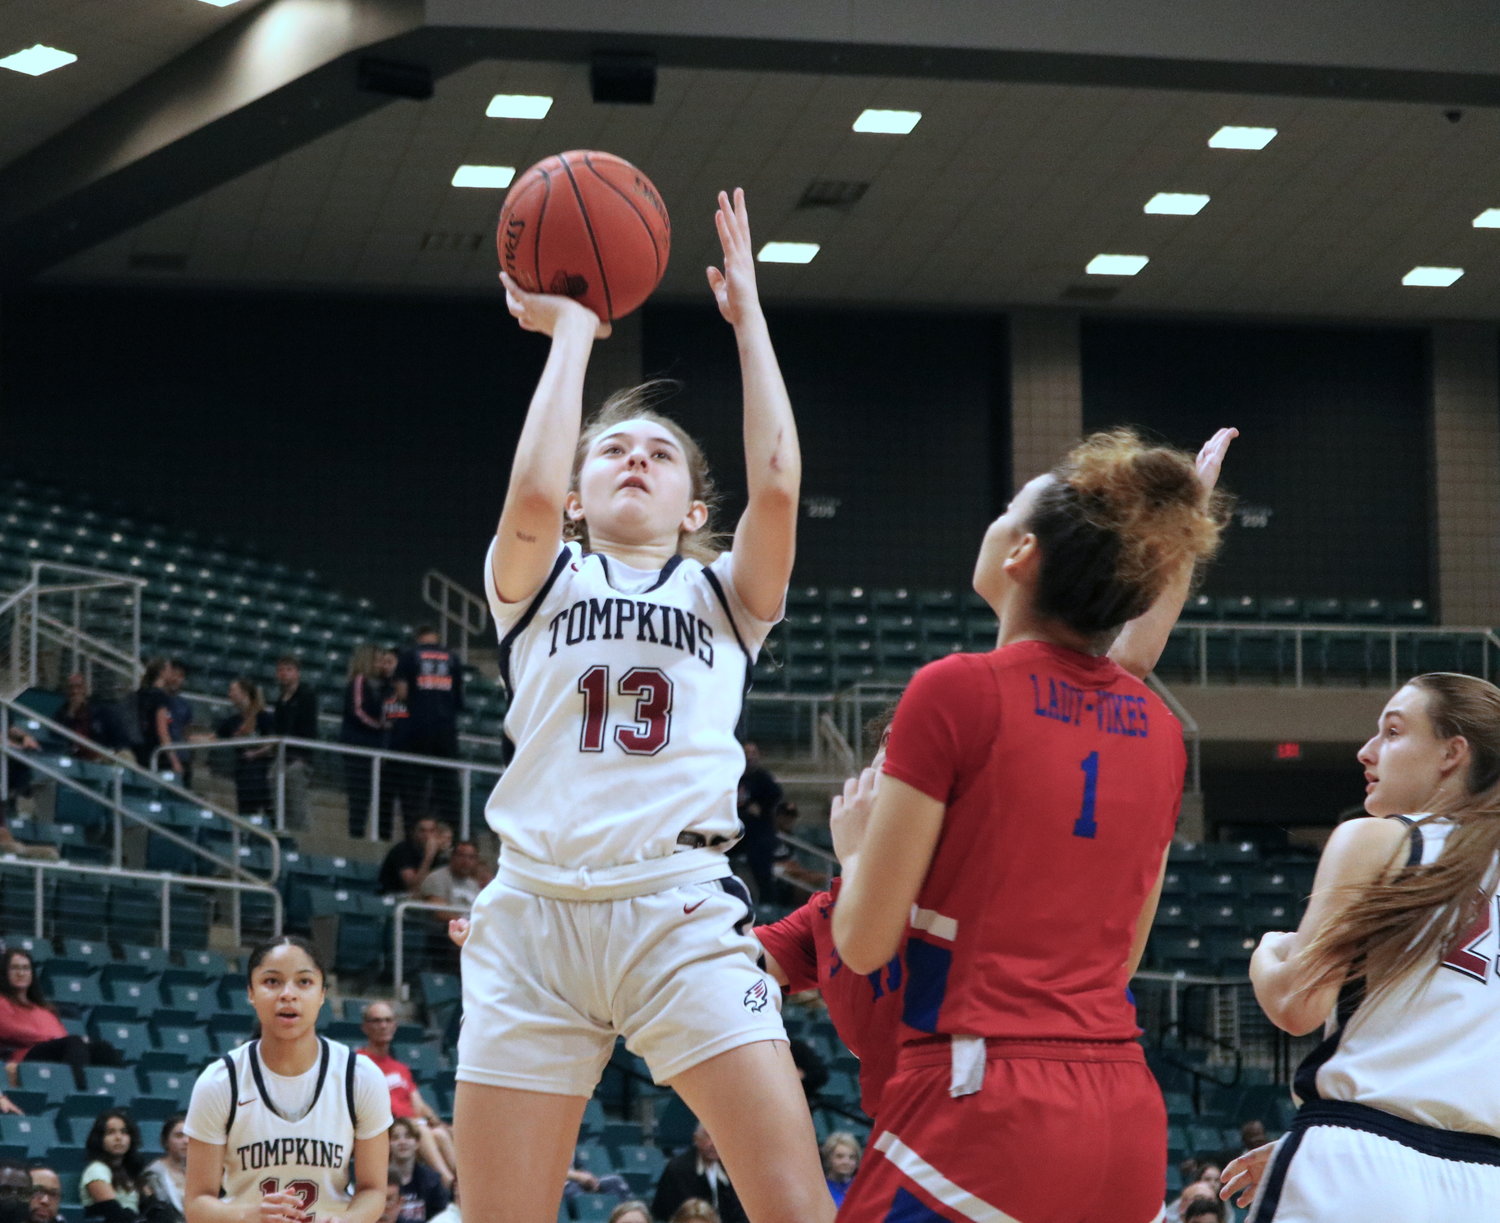 Tompkins’ Macy Spencer shoots a jumper during Tuesday’s Class 6A regional quarterfinal against Fort Bend Dulles at the Merrell Center.